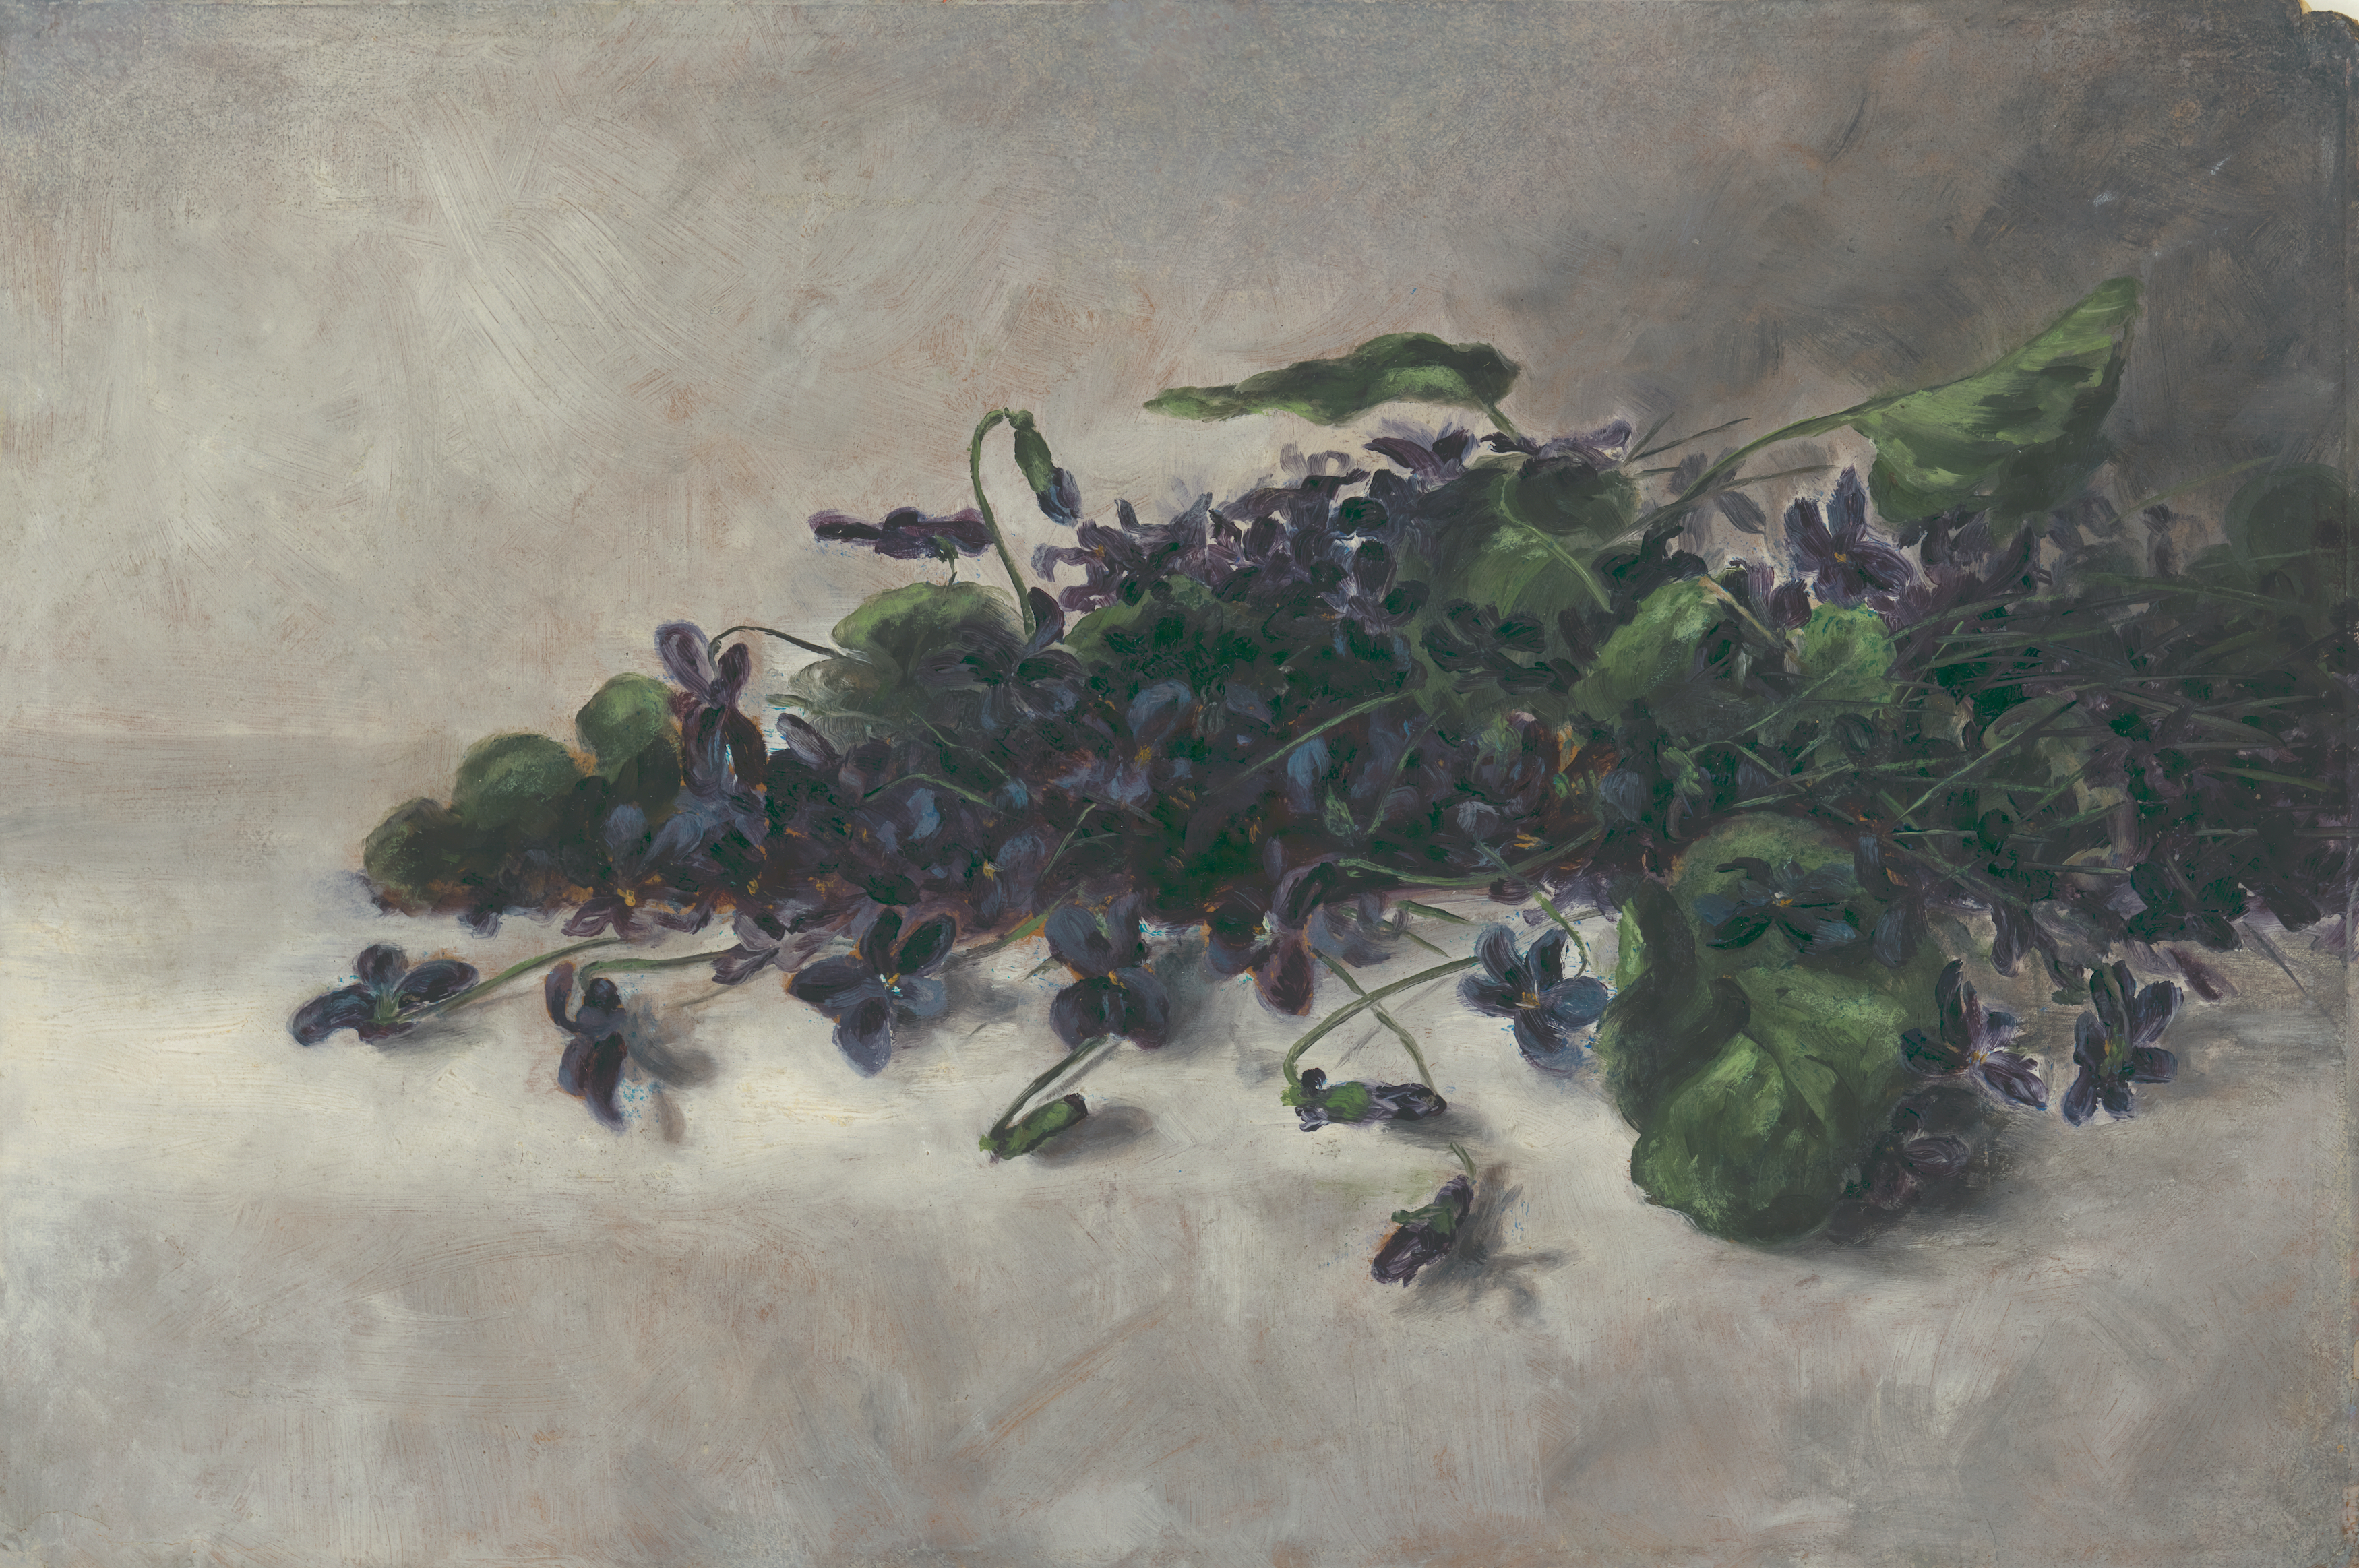 Violets by Pauline Powell Burns - ca. 1890 - 27.3 × 31.4 cm National Museum of African-American History & Culture